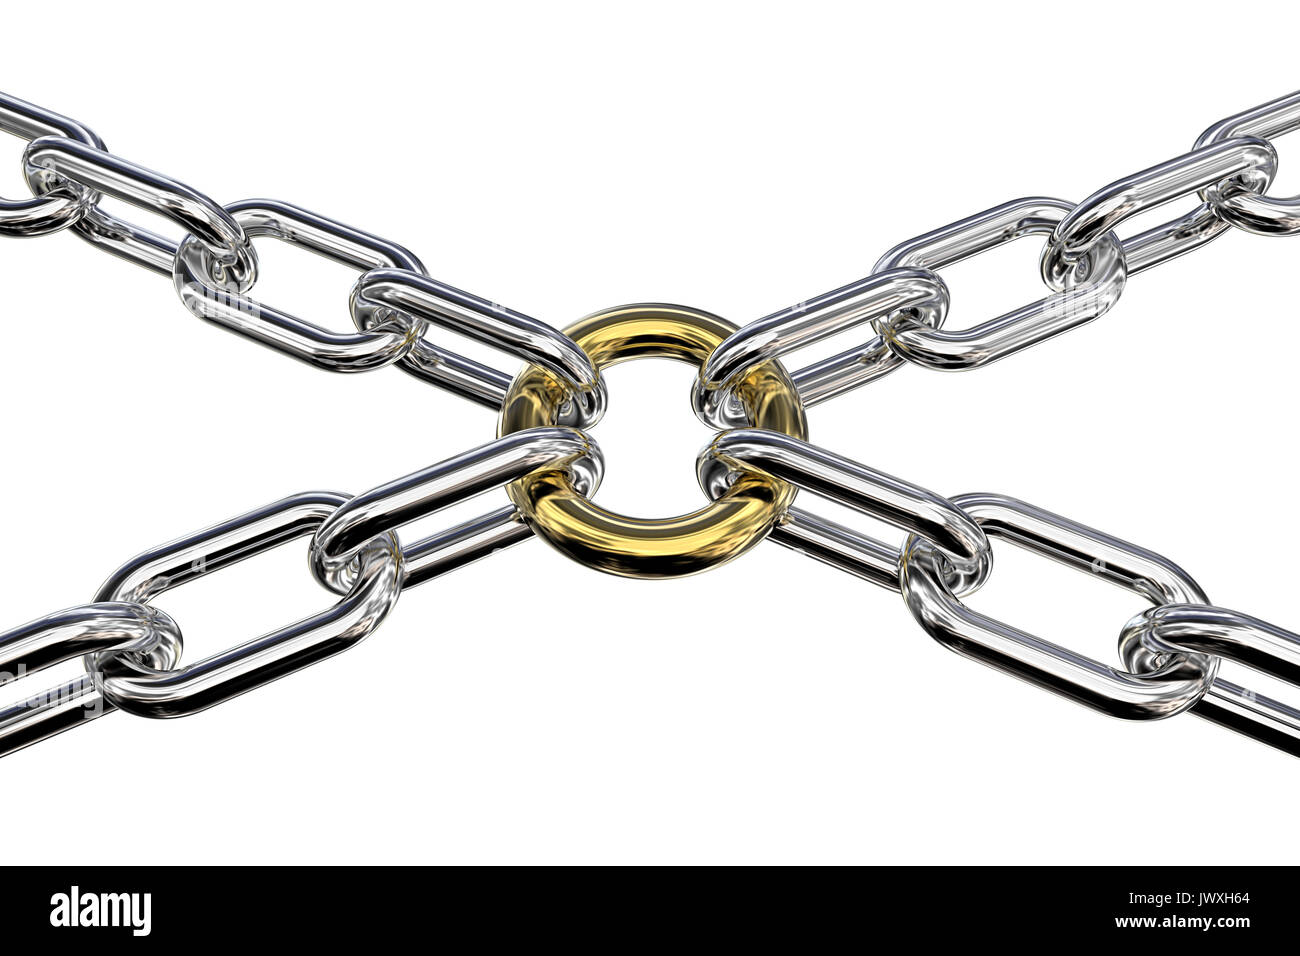 Golden ring connecting 4 Chain Links.  3d Render. Stock Photo